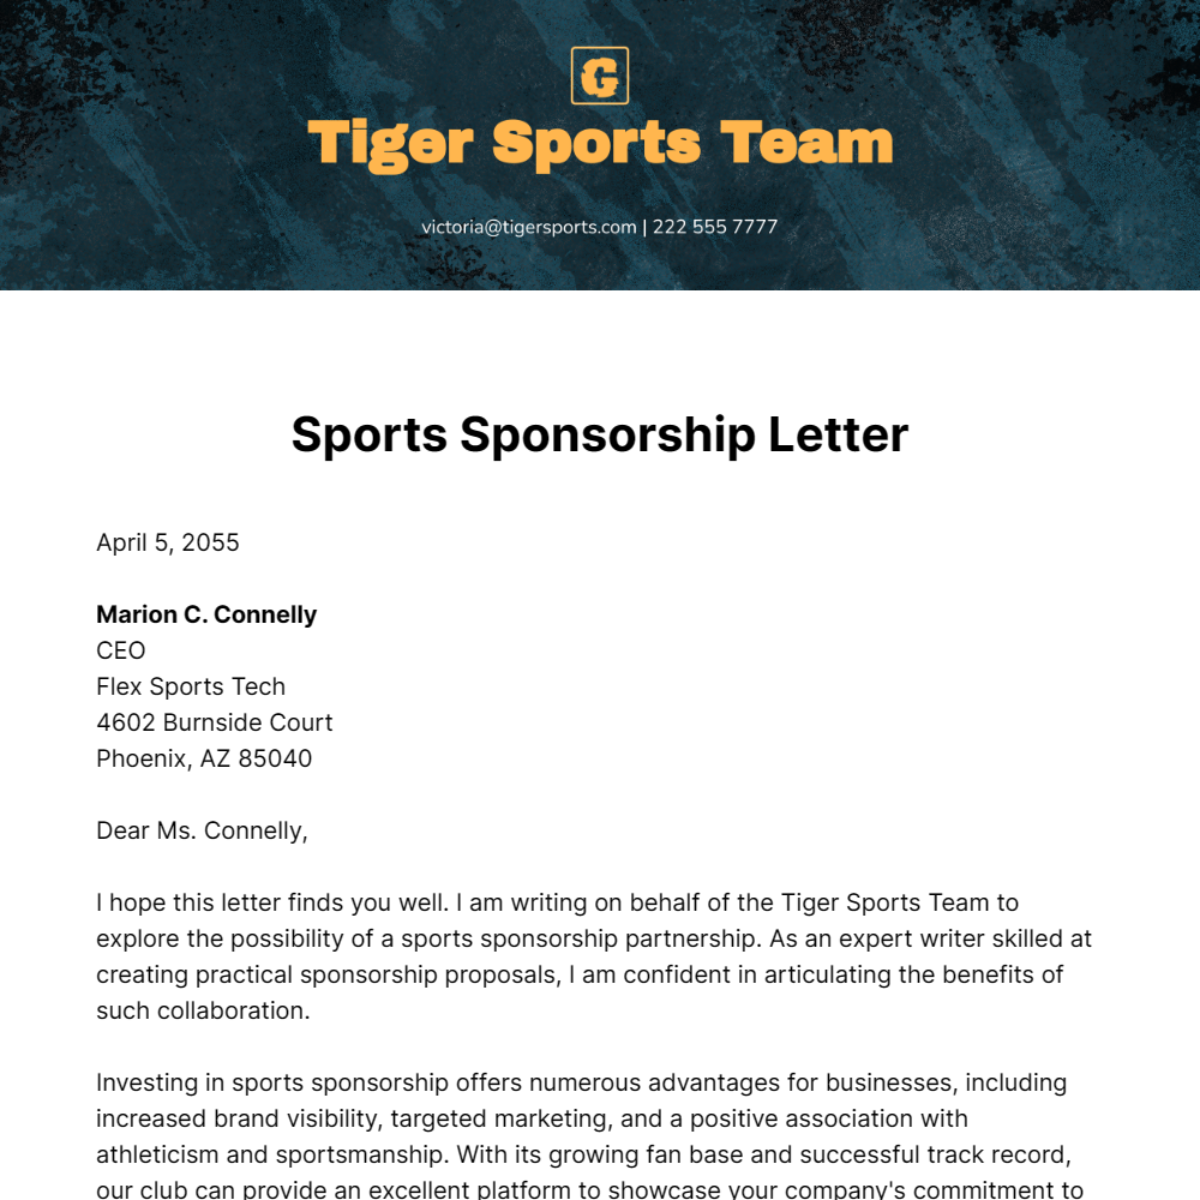 Benefits of Sports Sponsorship Letter Template